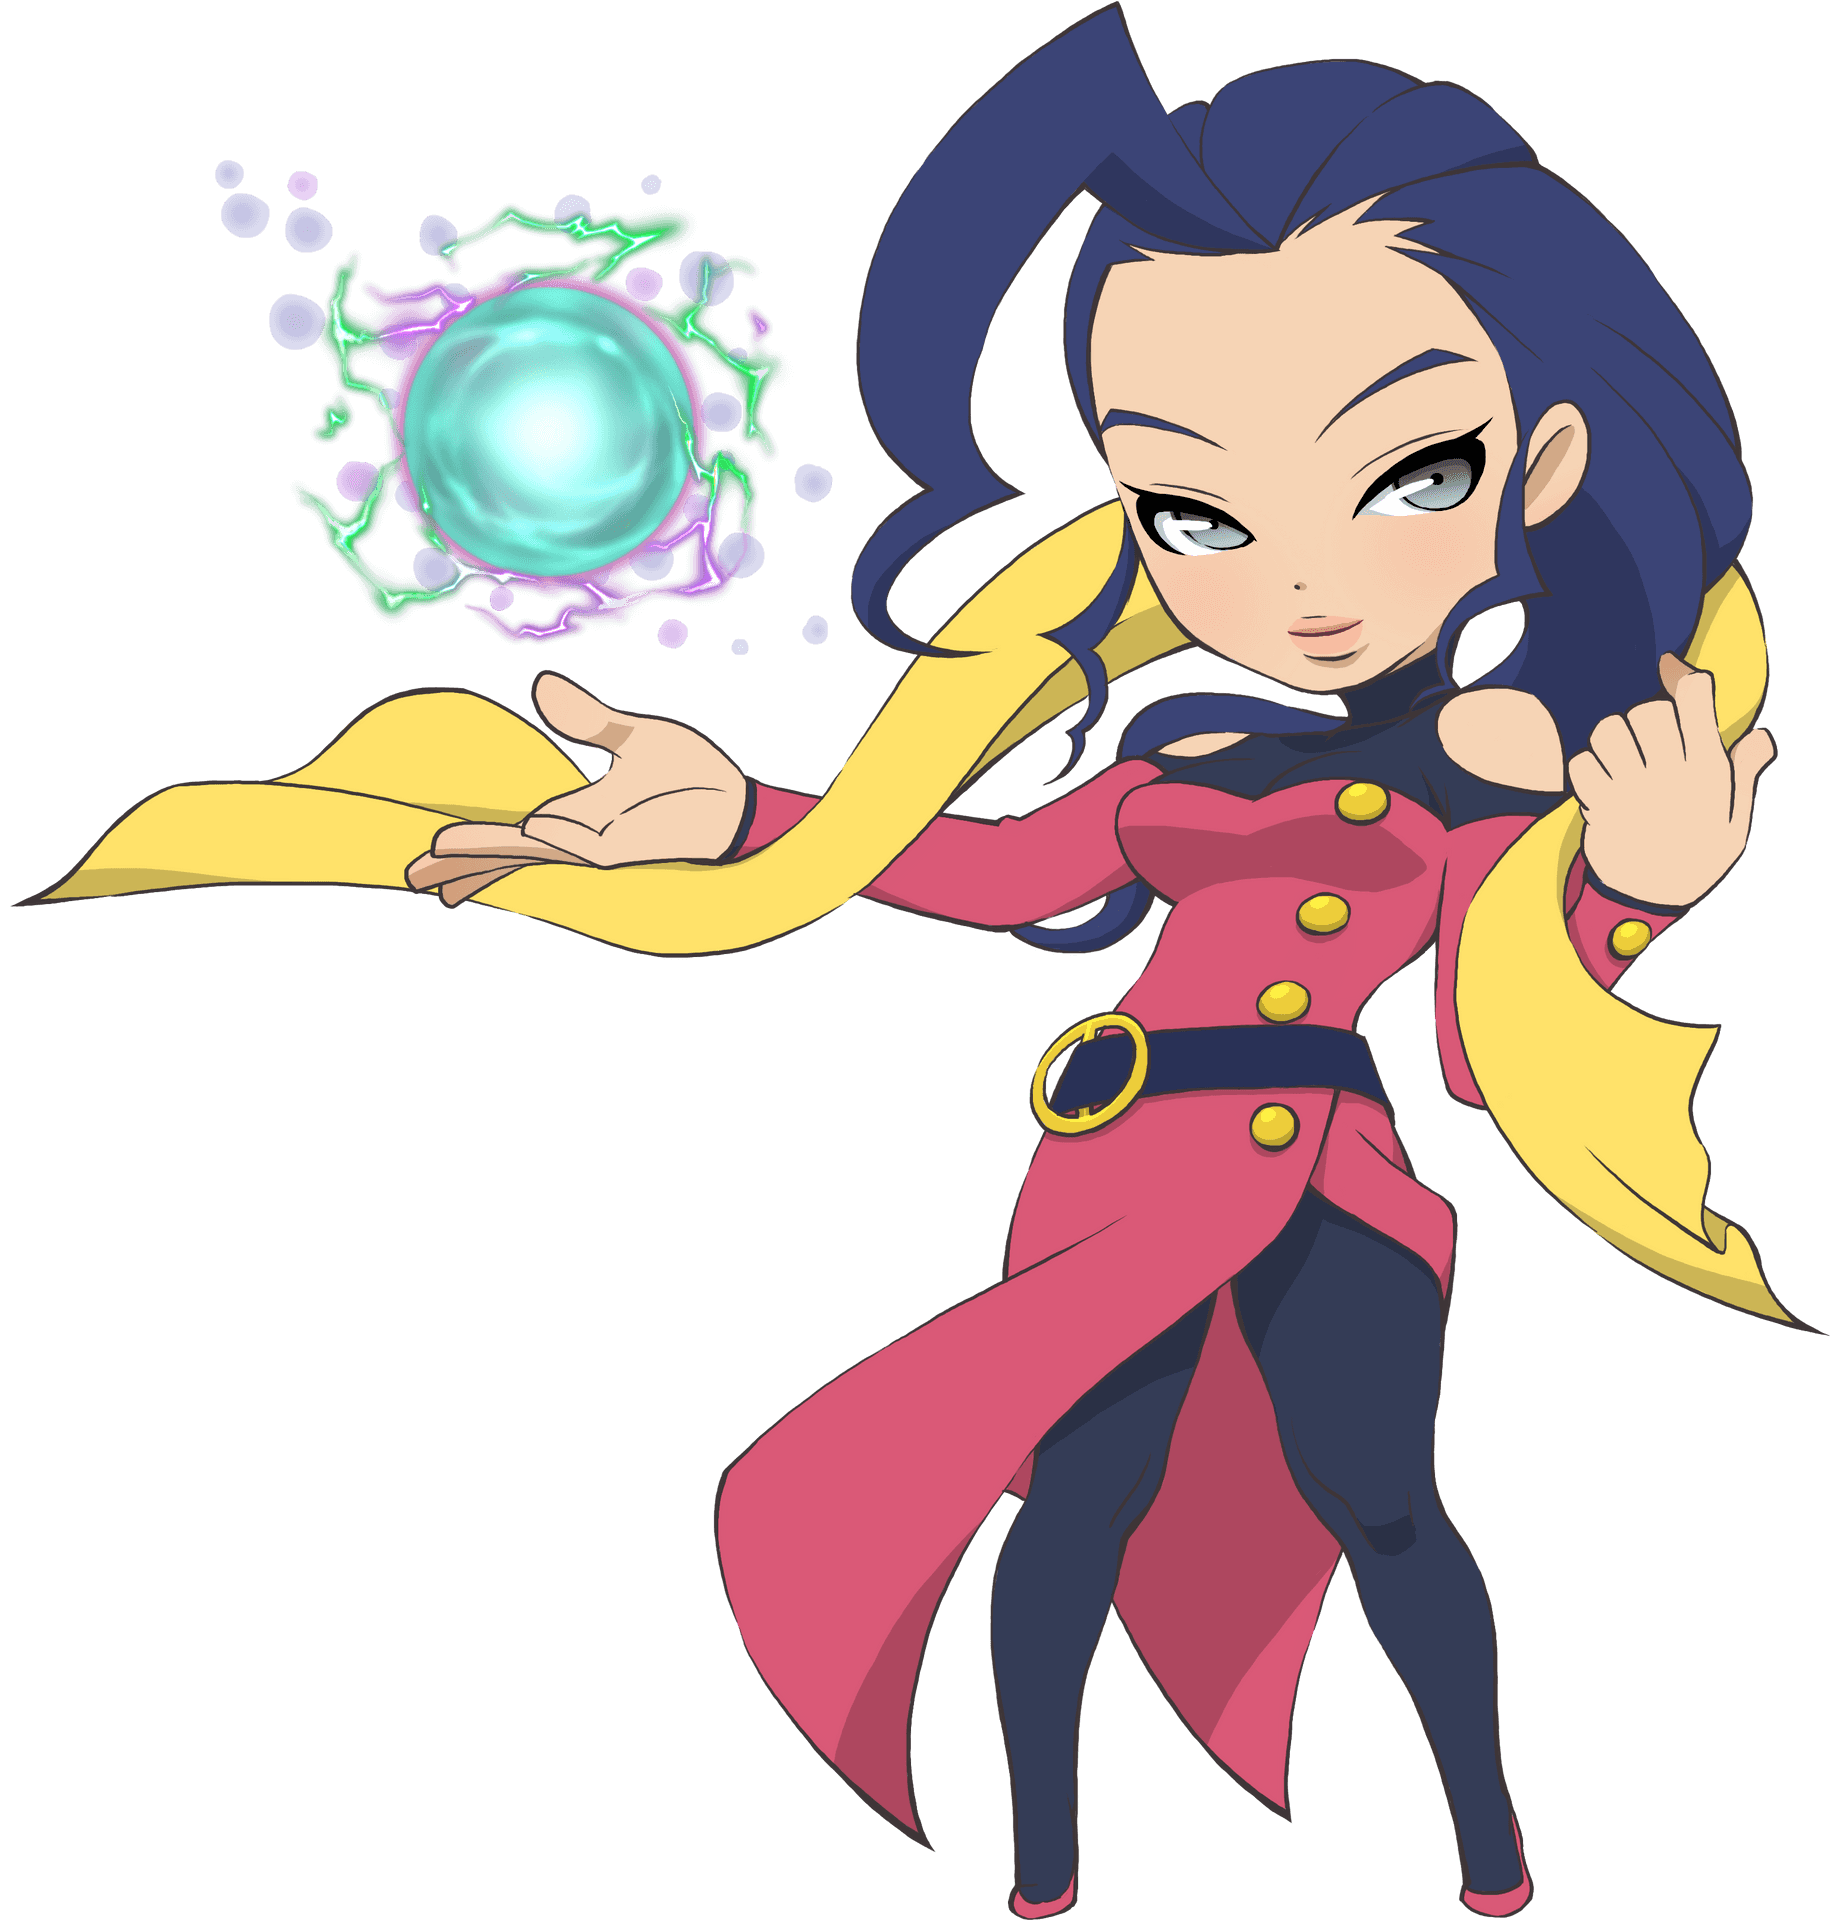 Animated Female Fighter Casting Energy Ball PNG image